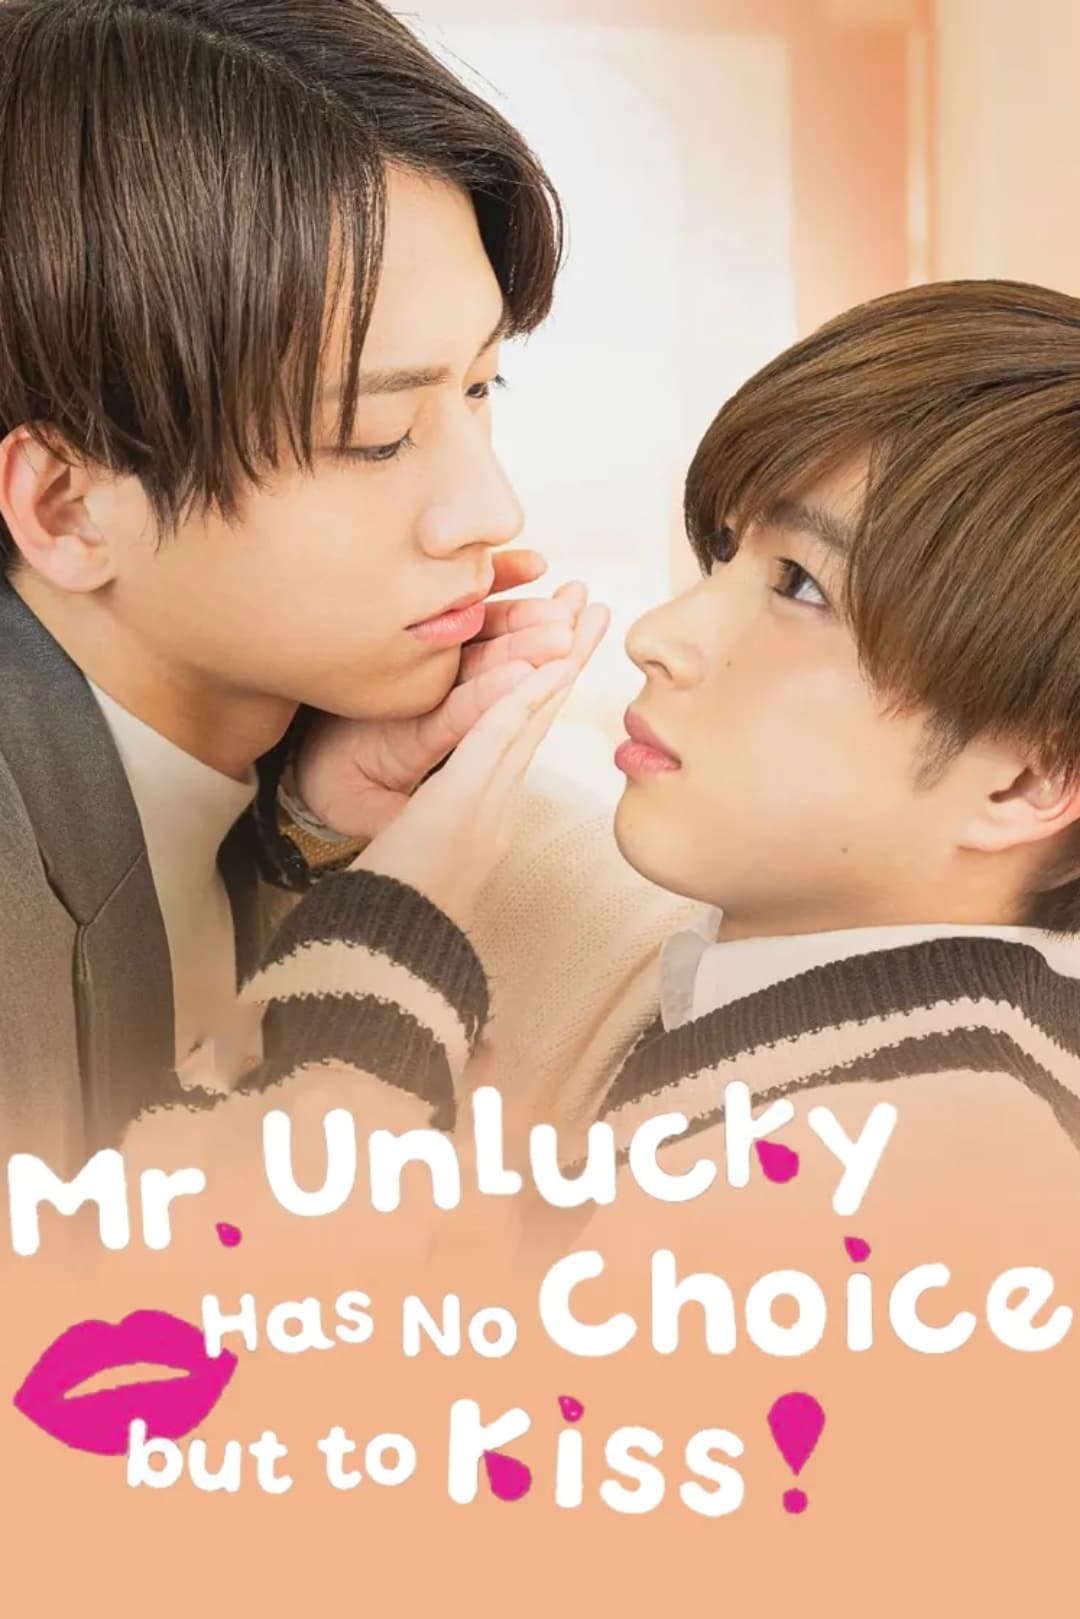 Image for tv Mr. Unlucky Has No Choice but to Kiss!